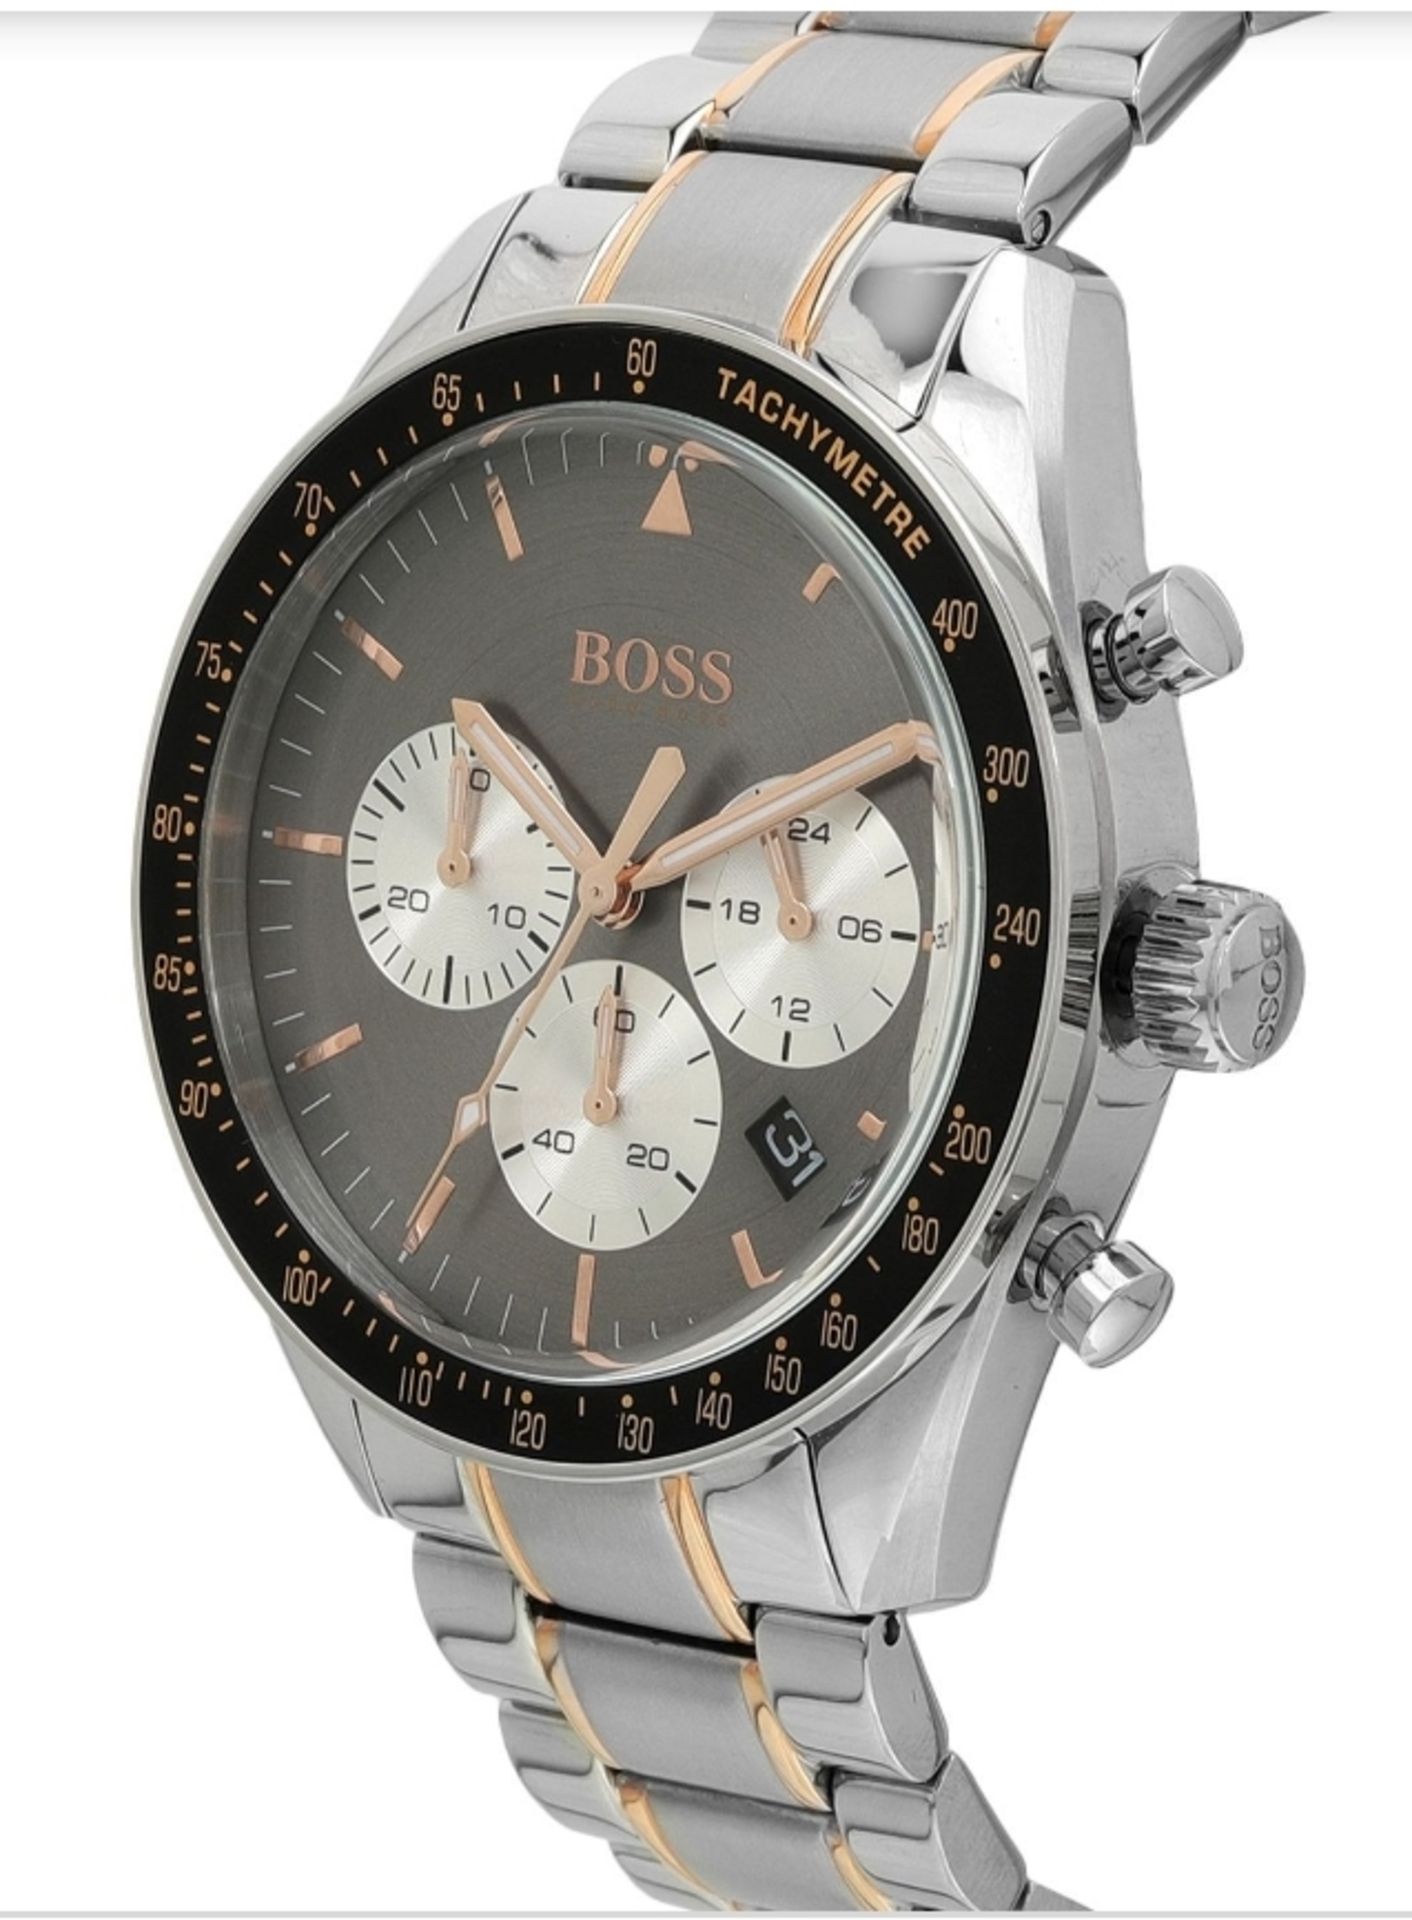 Hugo Boss 1513634 Men's Trophy Two Tone Rose Gold & Silver Chronograph Watch - Image 6 of 6